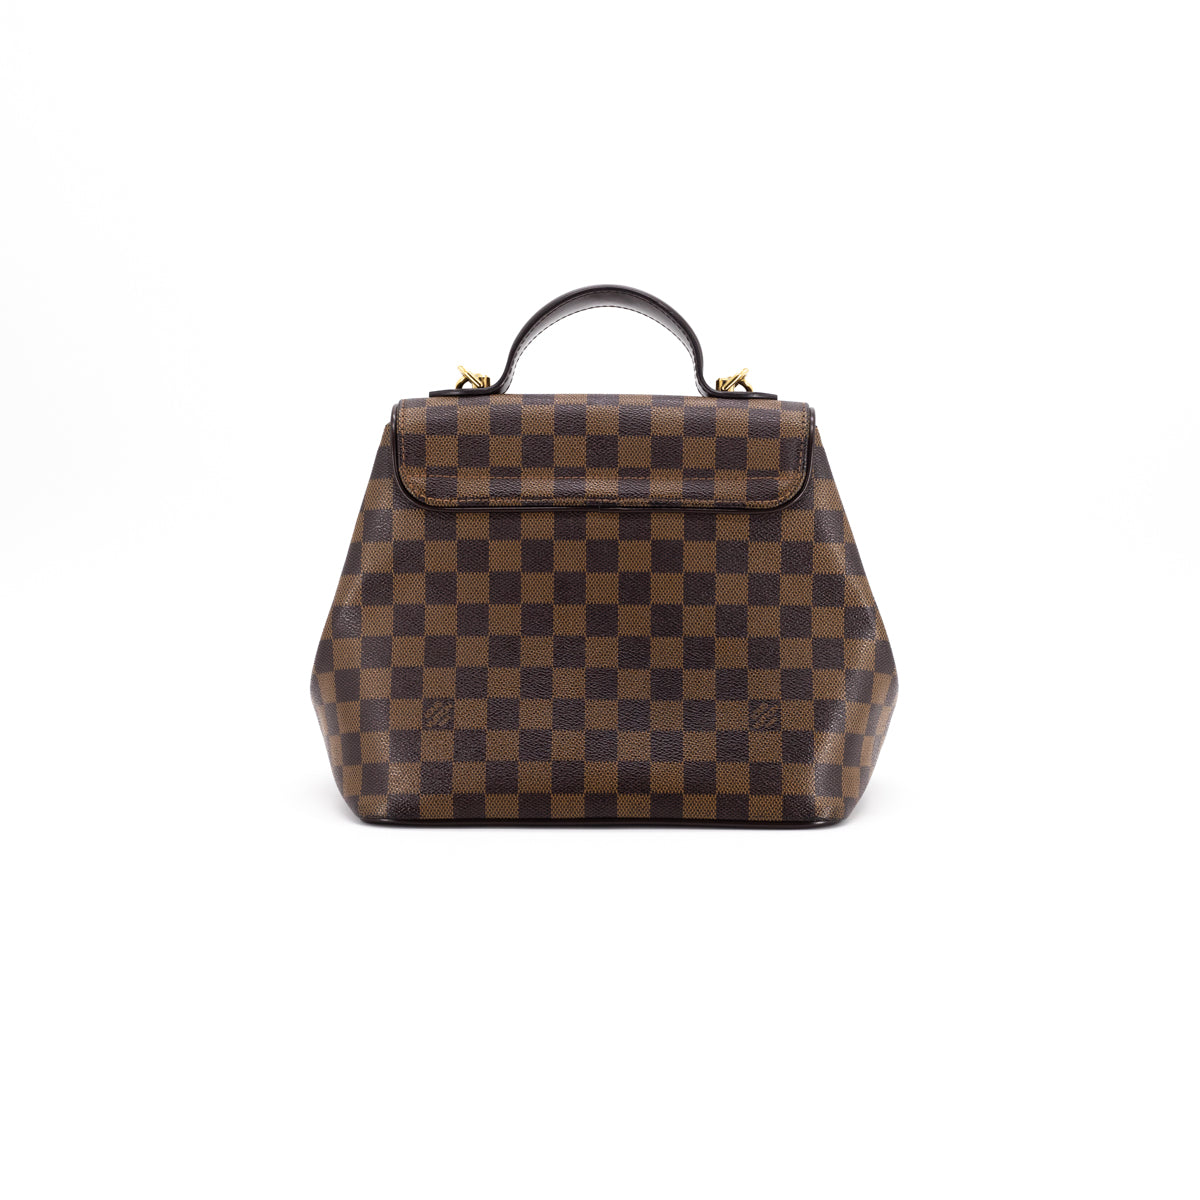 Louis Vuitton Bergamo MM Handbag, Damier Ebene Details .:   * 100% AUTHENTIC GOODS - 100% WORRY-FREE * is Largest  Online Store and Retail Outlet in Australia to BUY, SELL, CONSIGN Pre-Owned